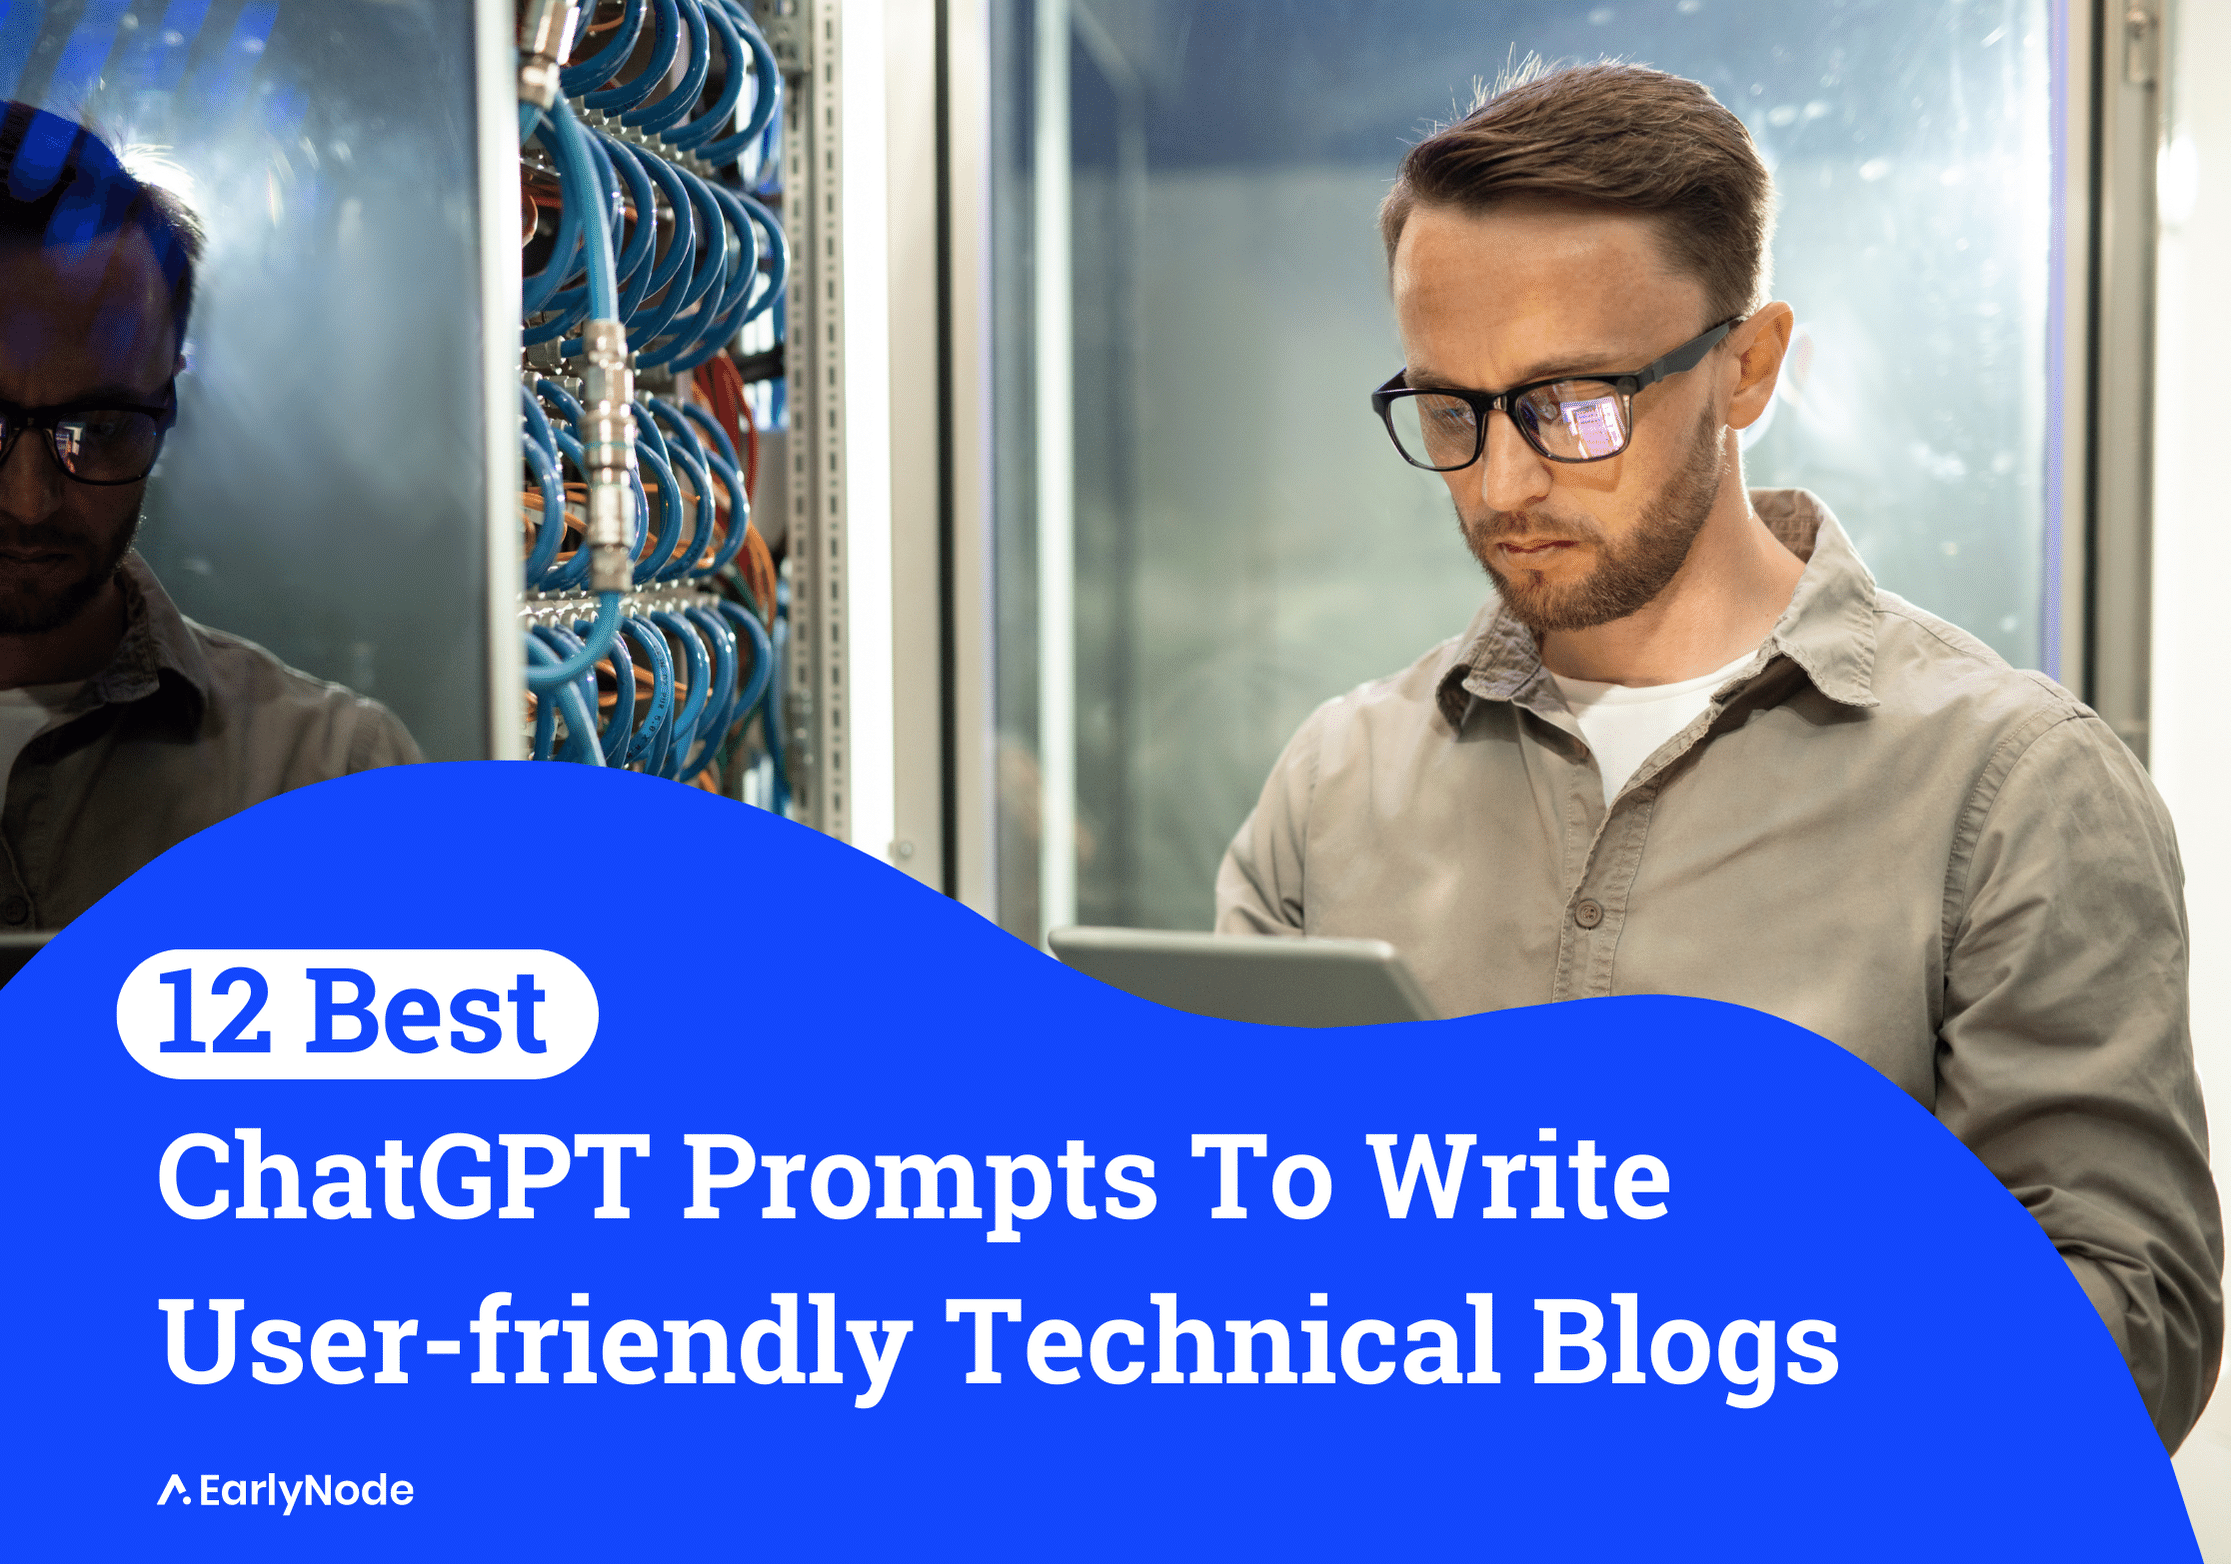 15 ChatGPT Prompts To Write User-friendly Technical Content